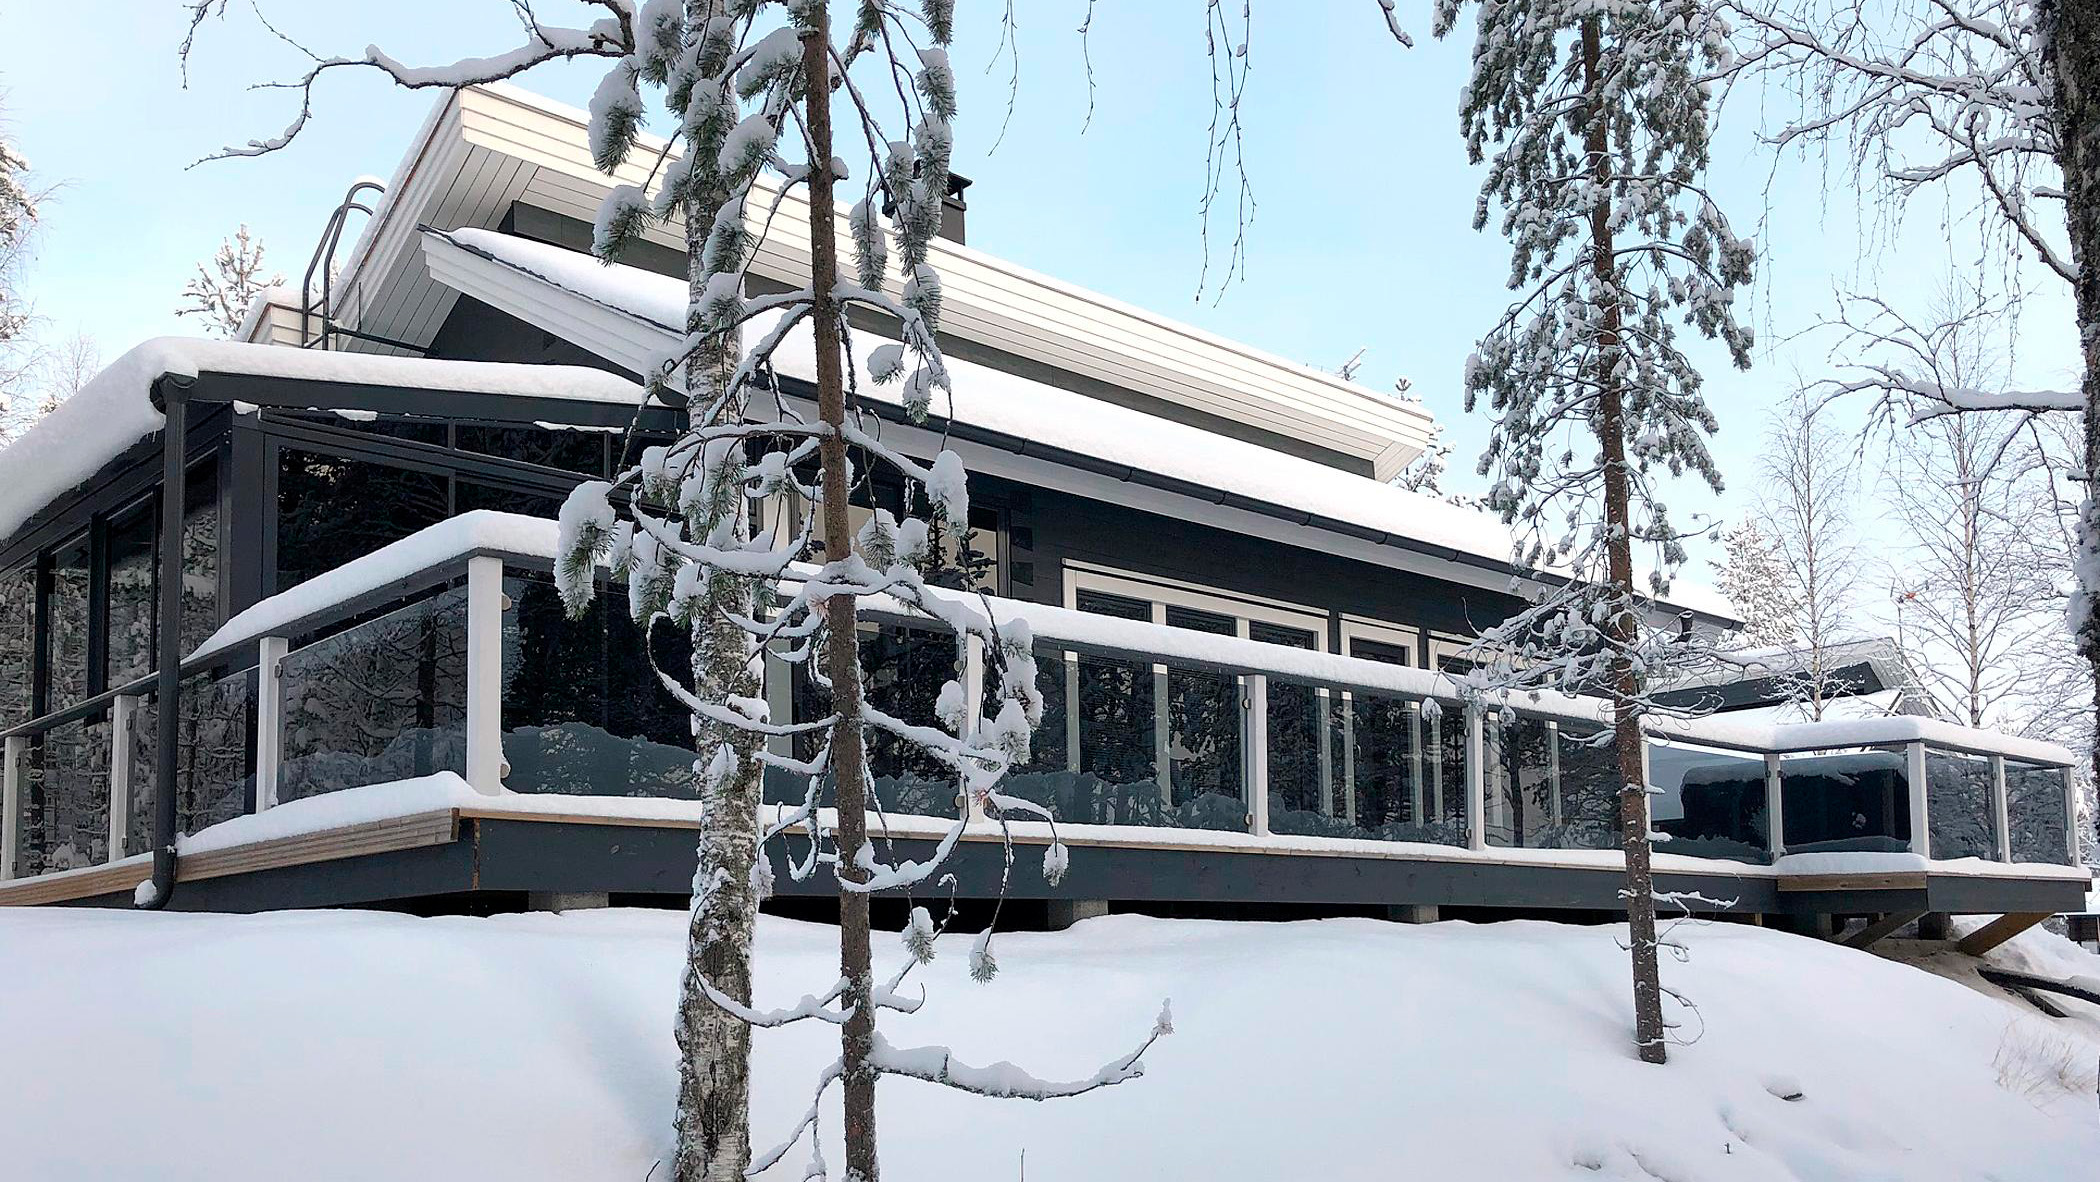 Private villacovered with snow in Finnish Lapland.